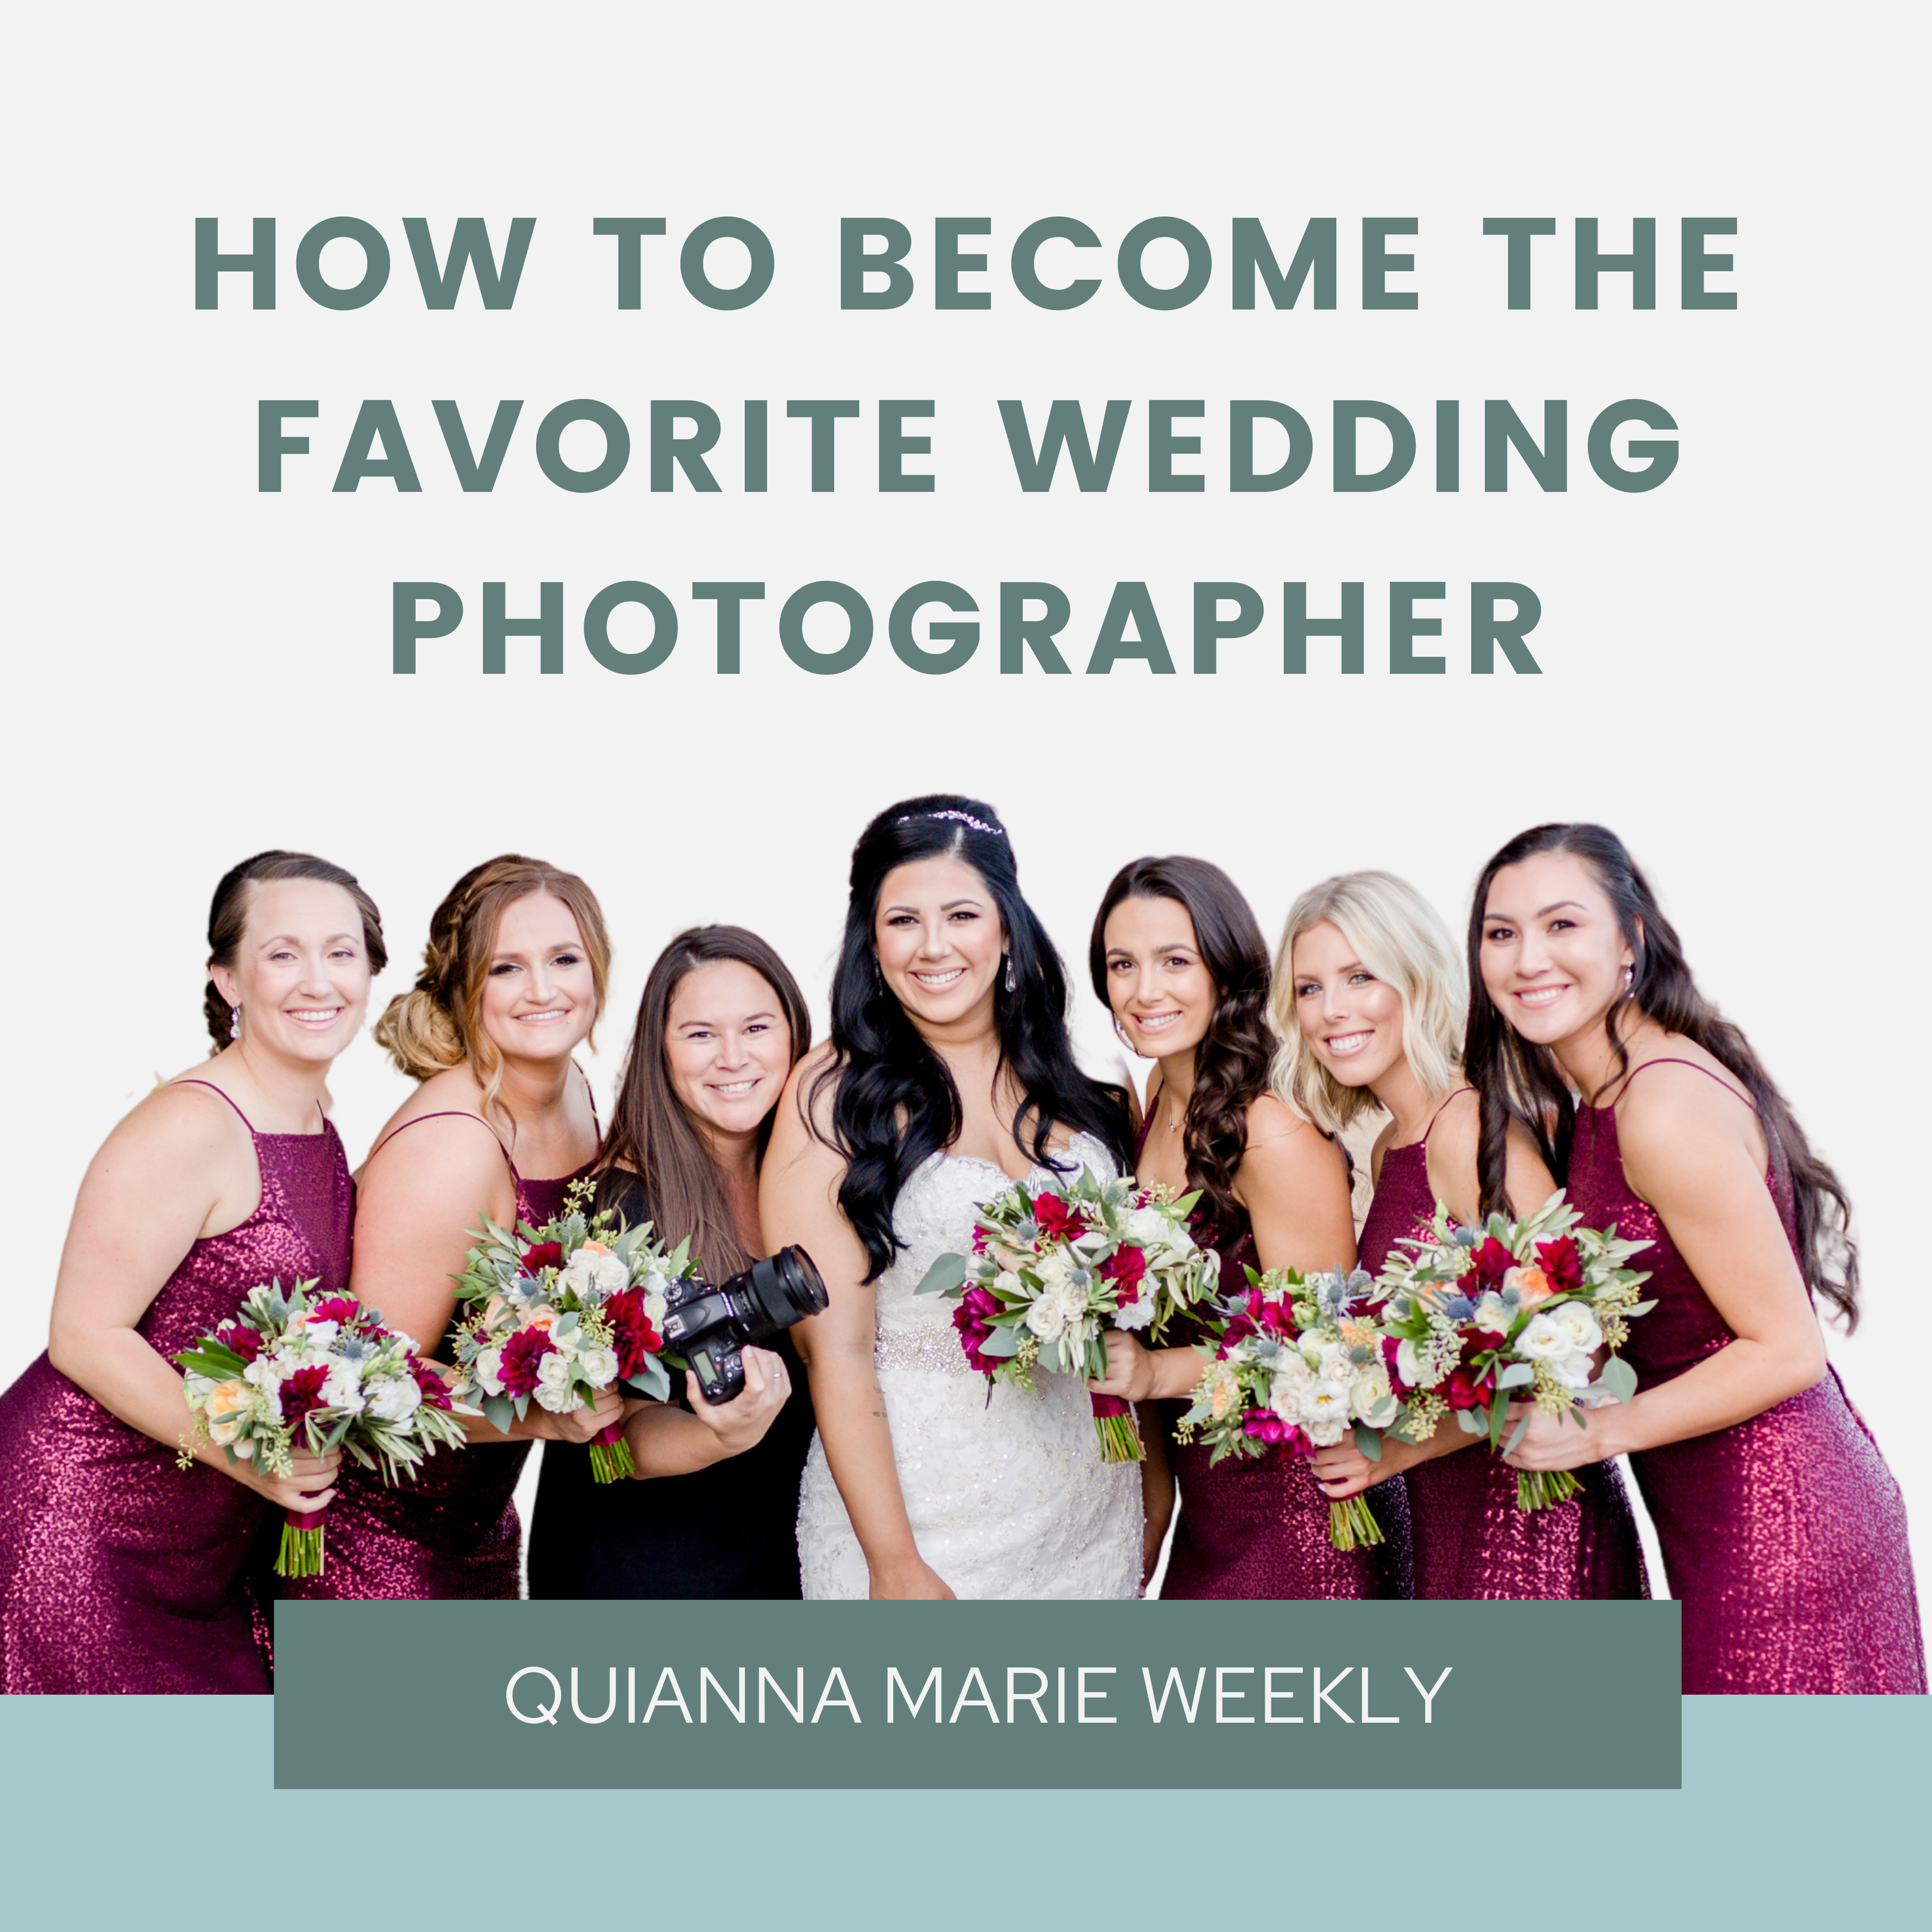 How To Be The Favorite Wedding Photographer with Quianna Marie